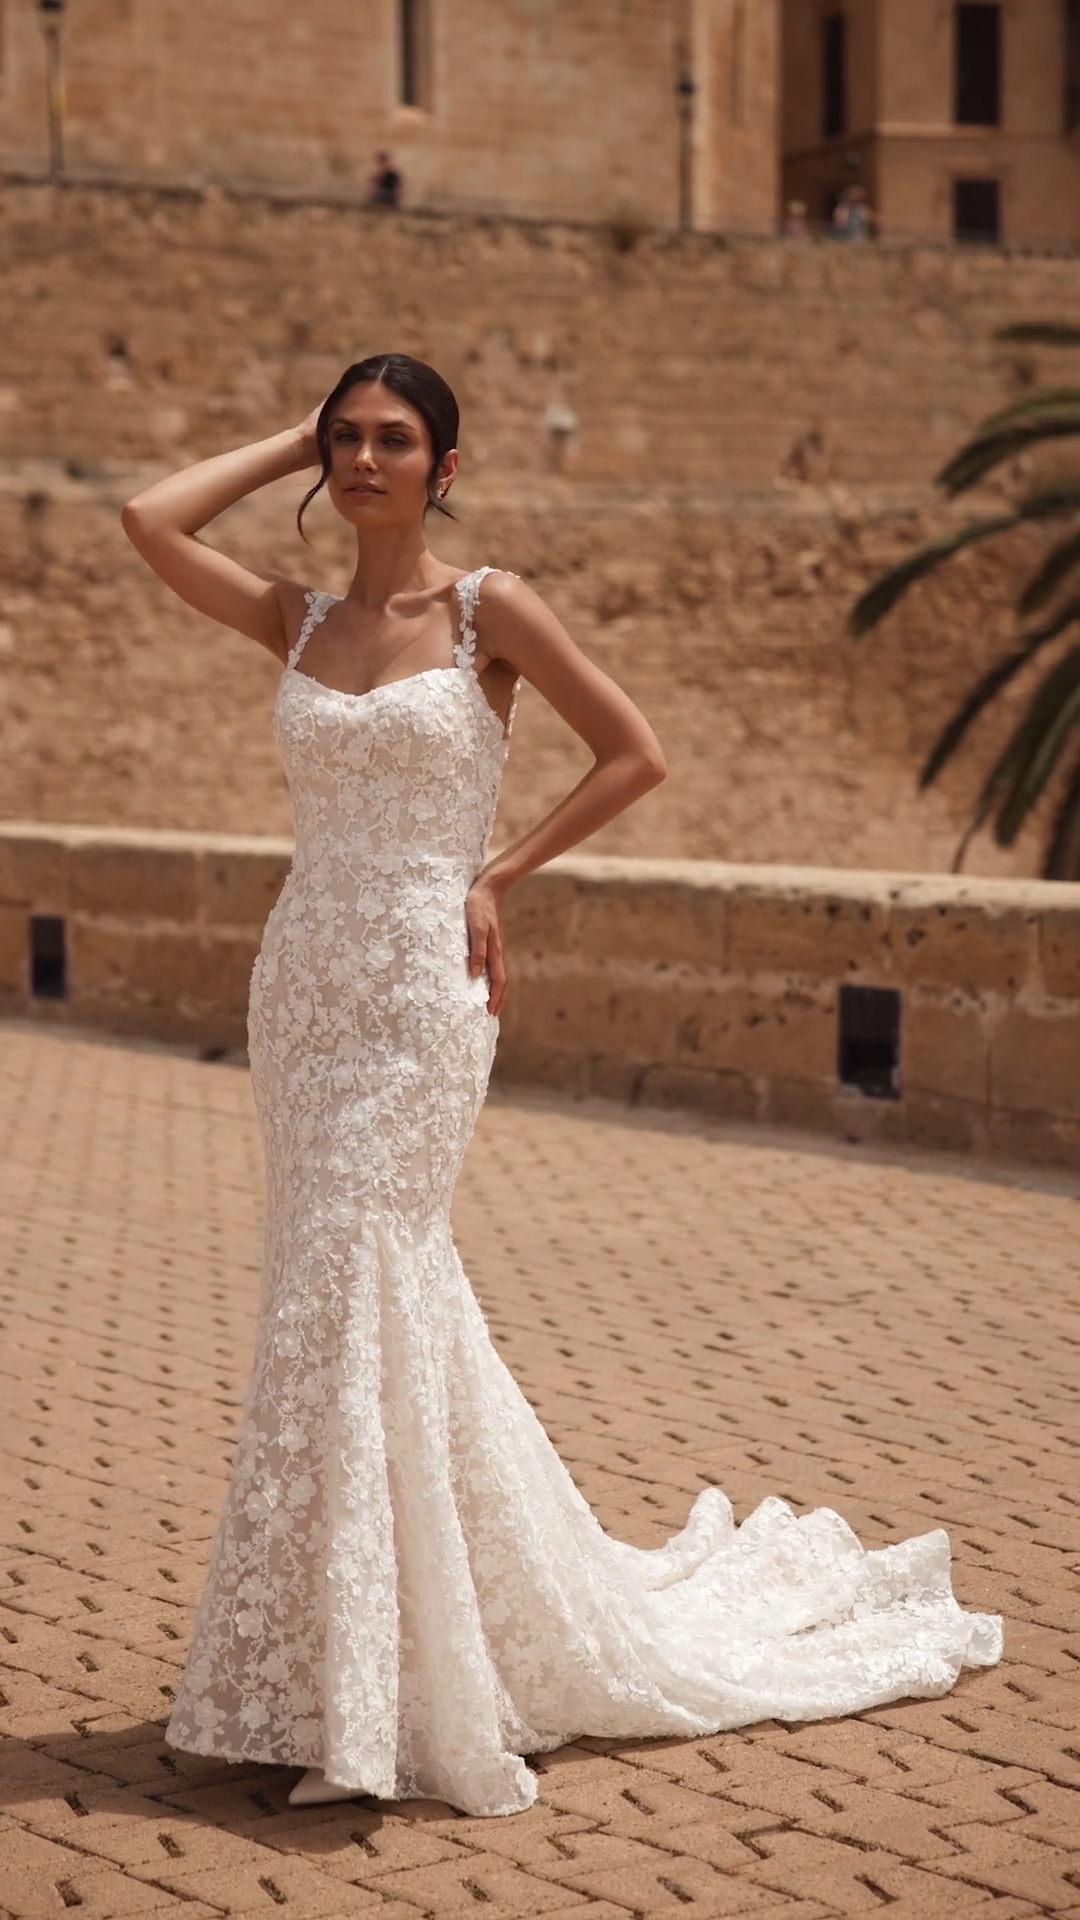 Bride Wearing Moonlight Couture H1563 A Mermaid Wedding Dress With Scoop Neckline and 3D Florals